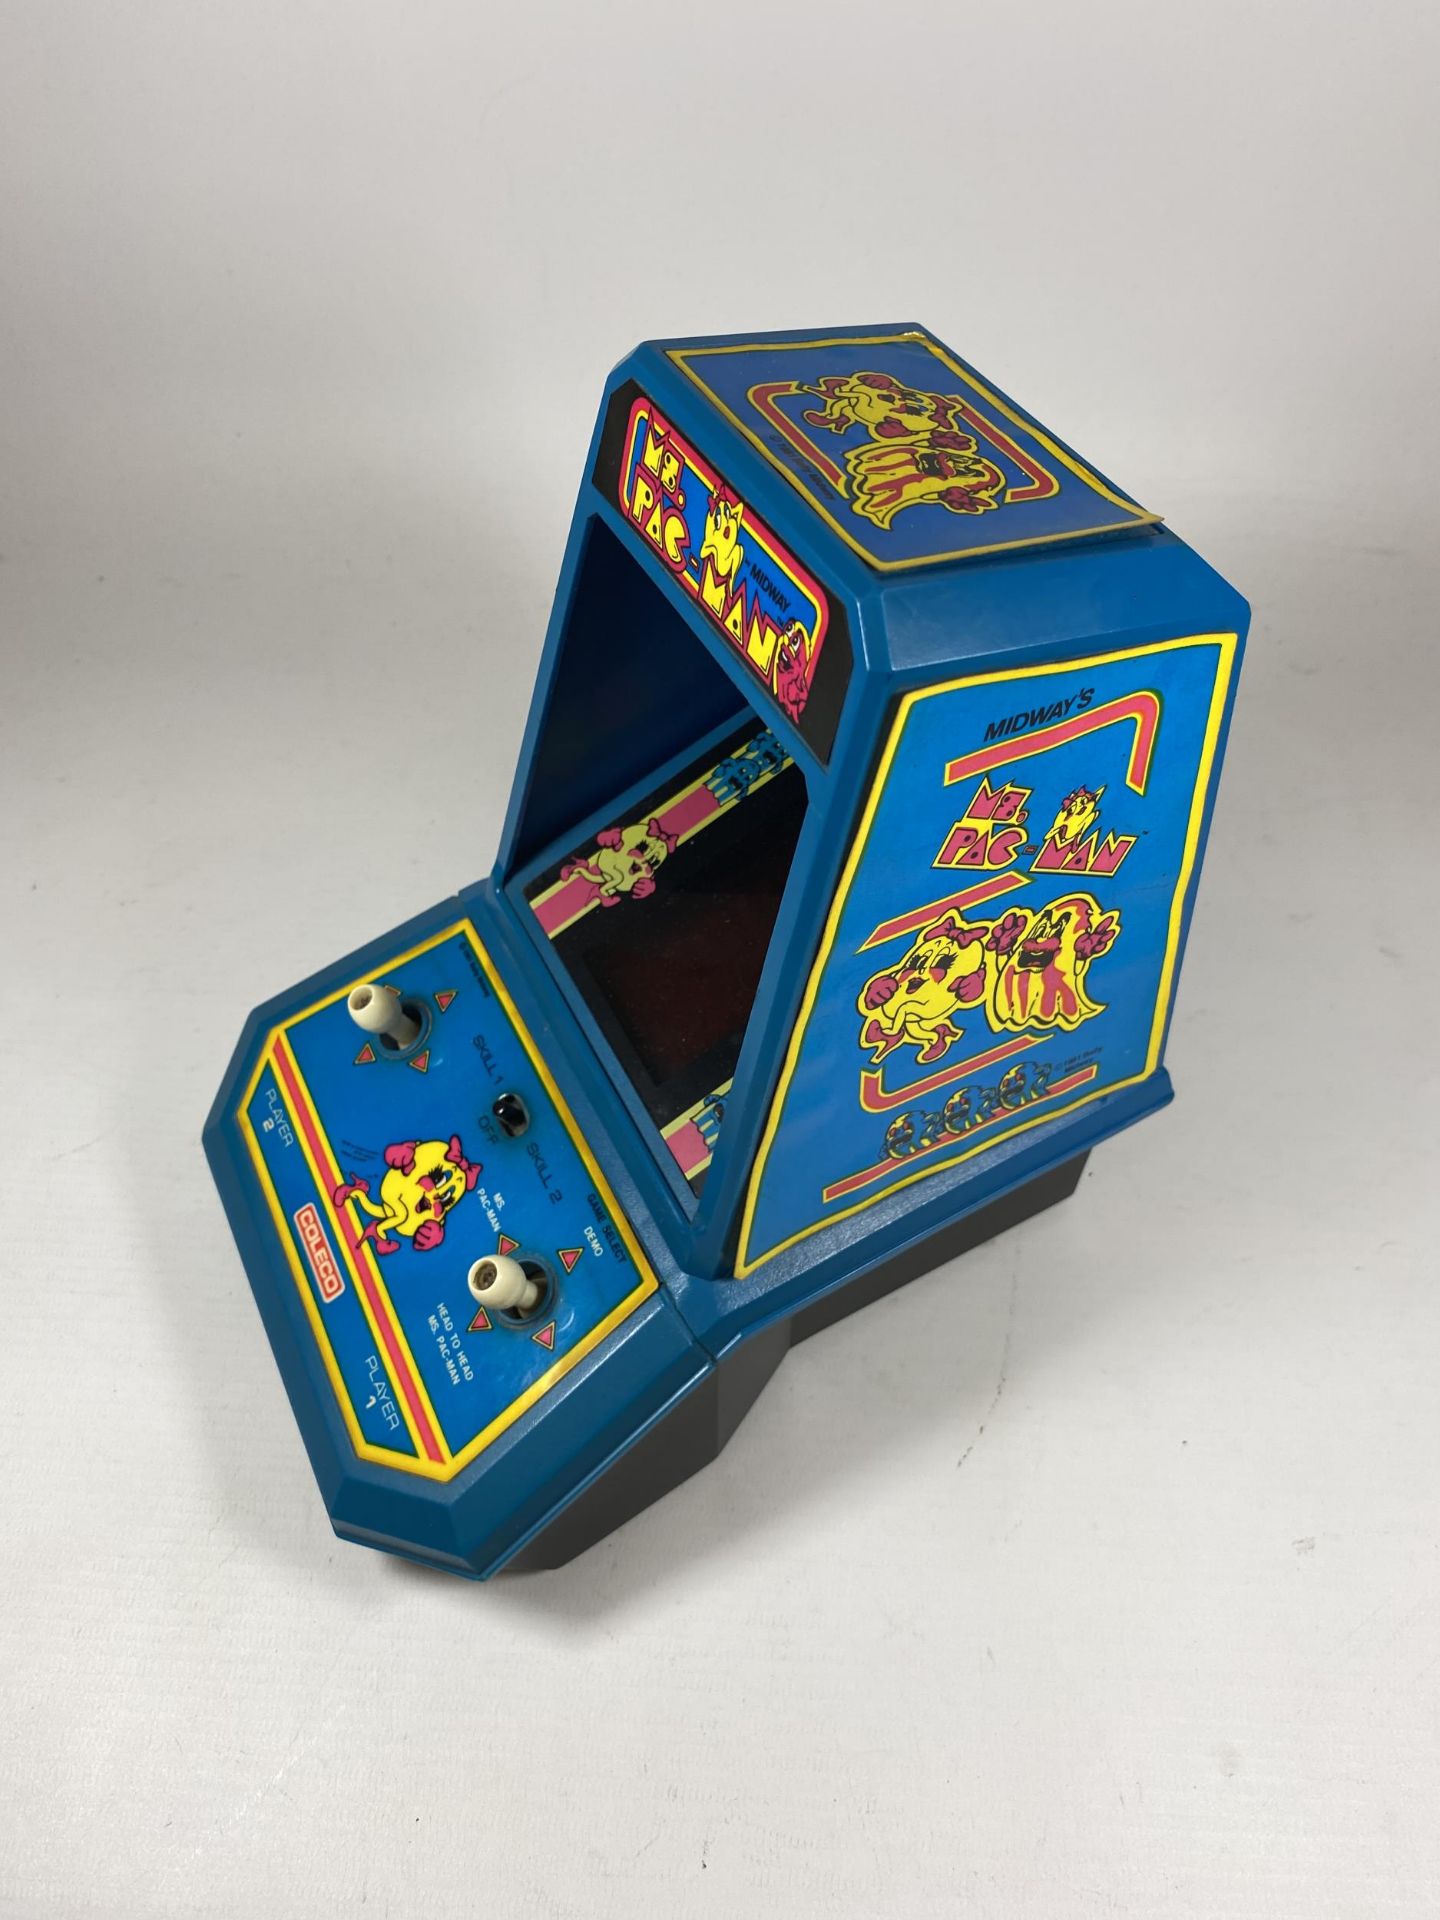 A RETRO COLECO PAC MAN MIDWAY TABLE TOP ARCADE GAME - Image 2 of 5